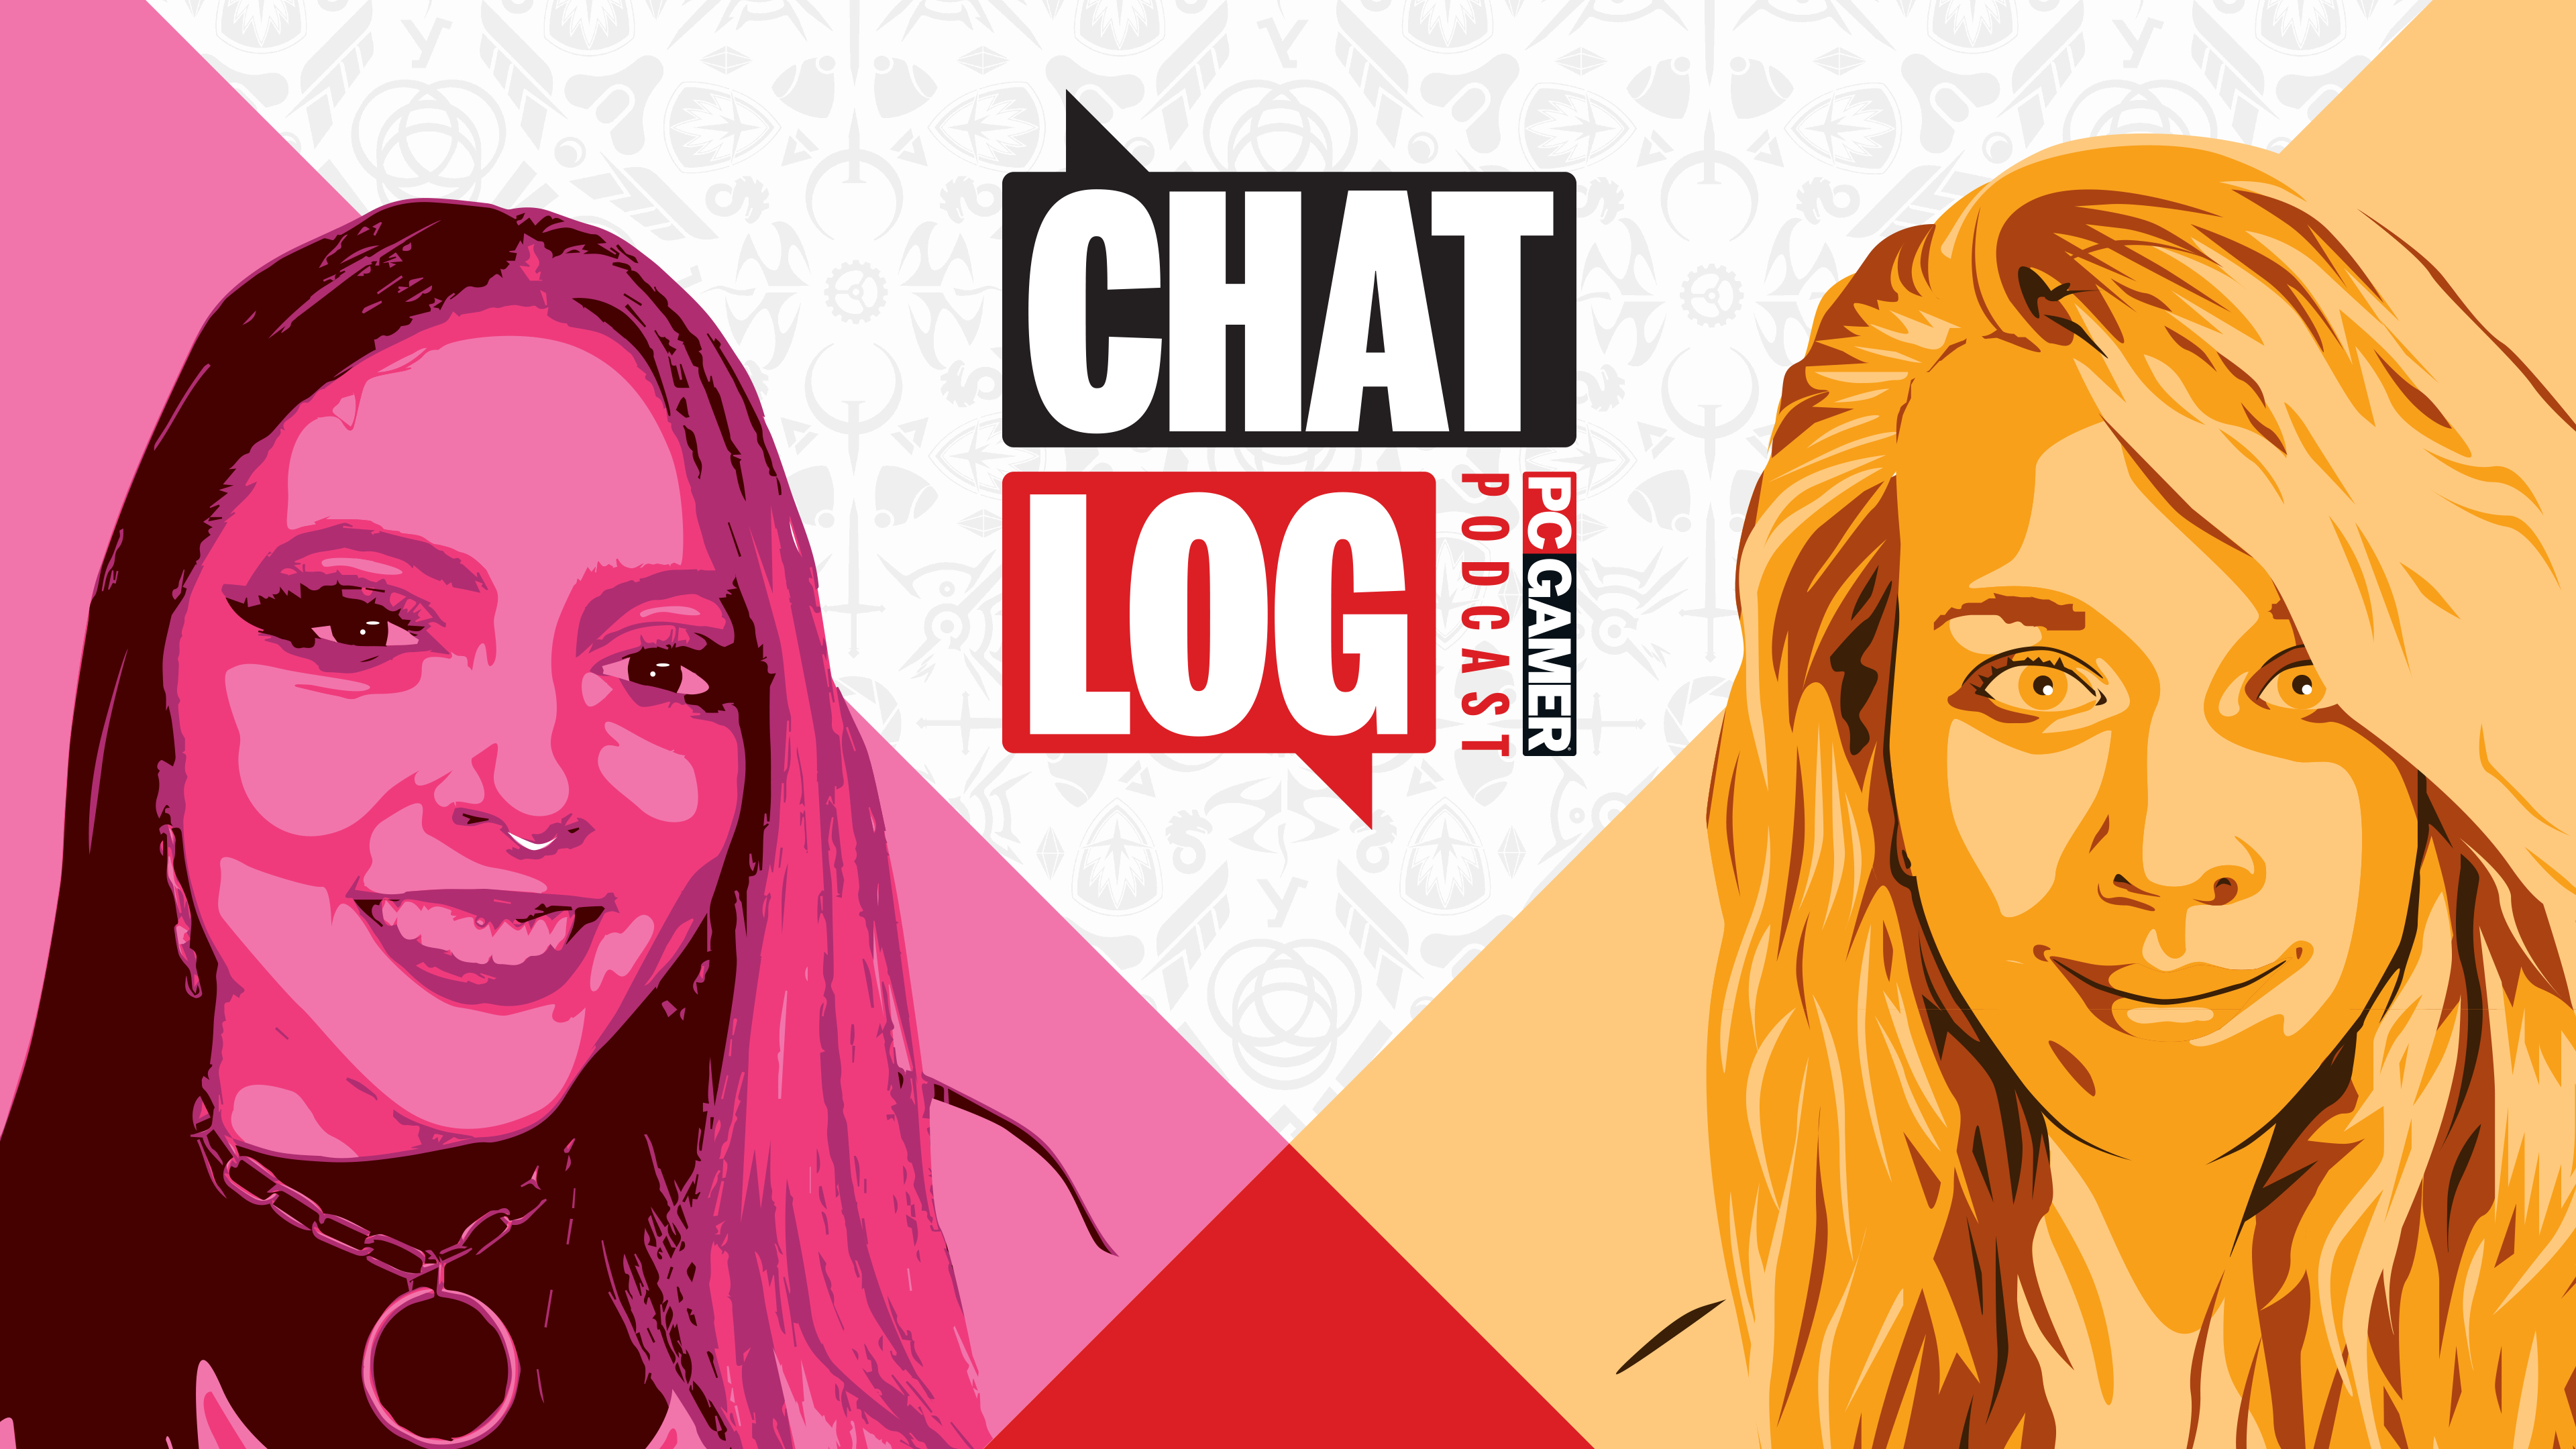  PC Gamer Chat Log Episode 28: The overhyped, the underhyped and the perfectly hyped 